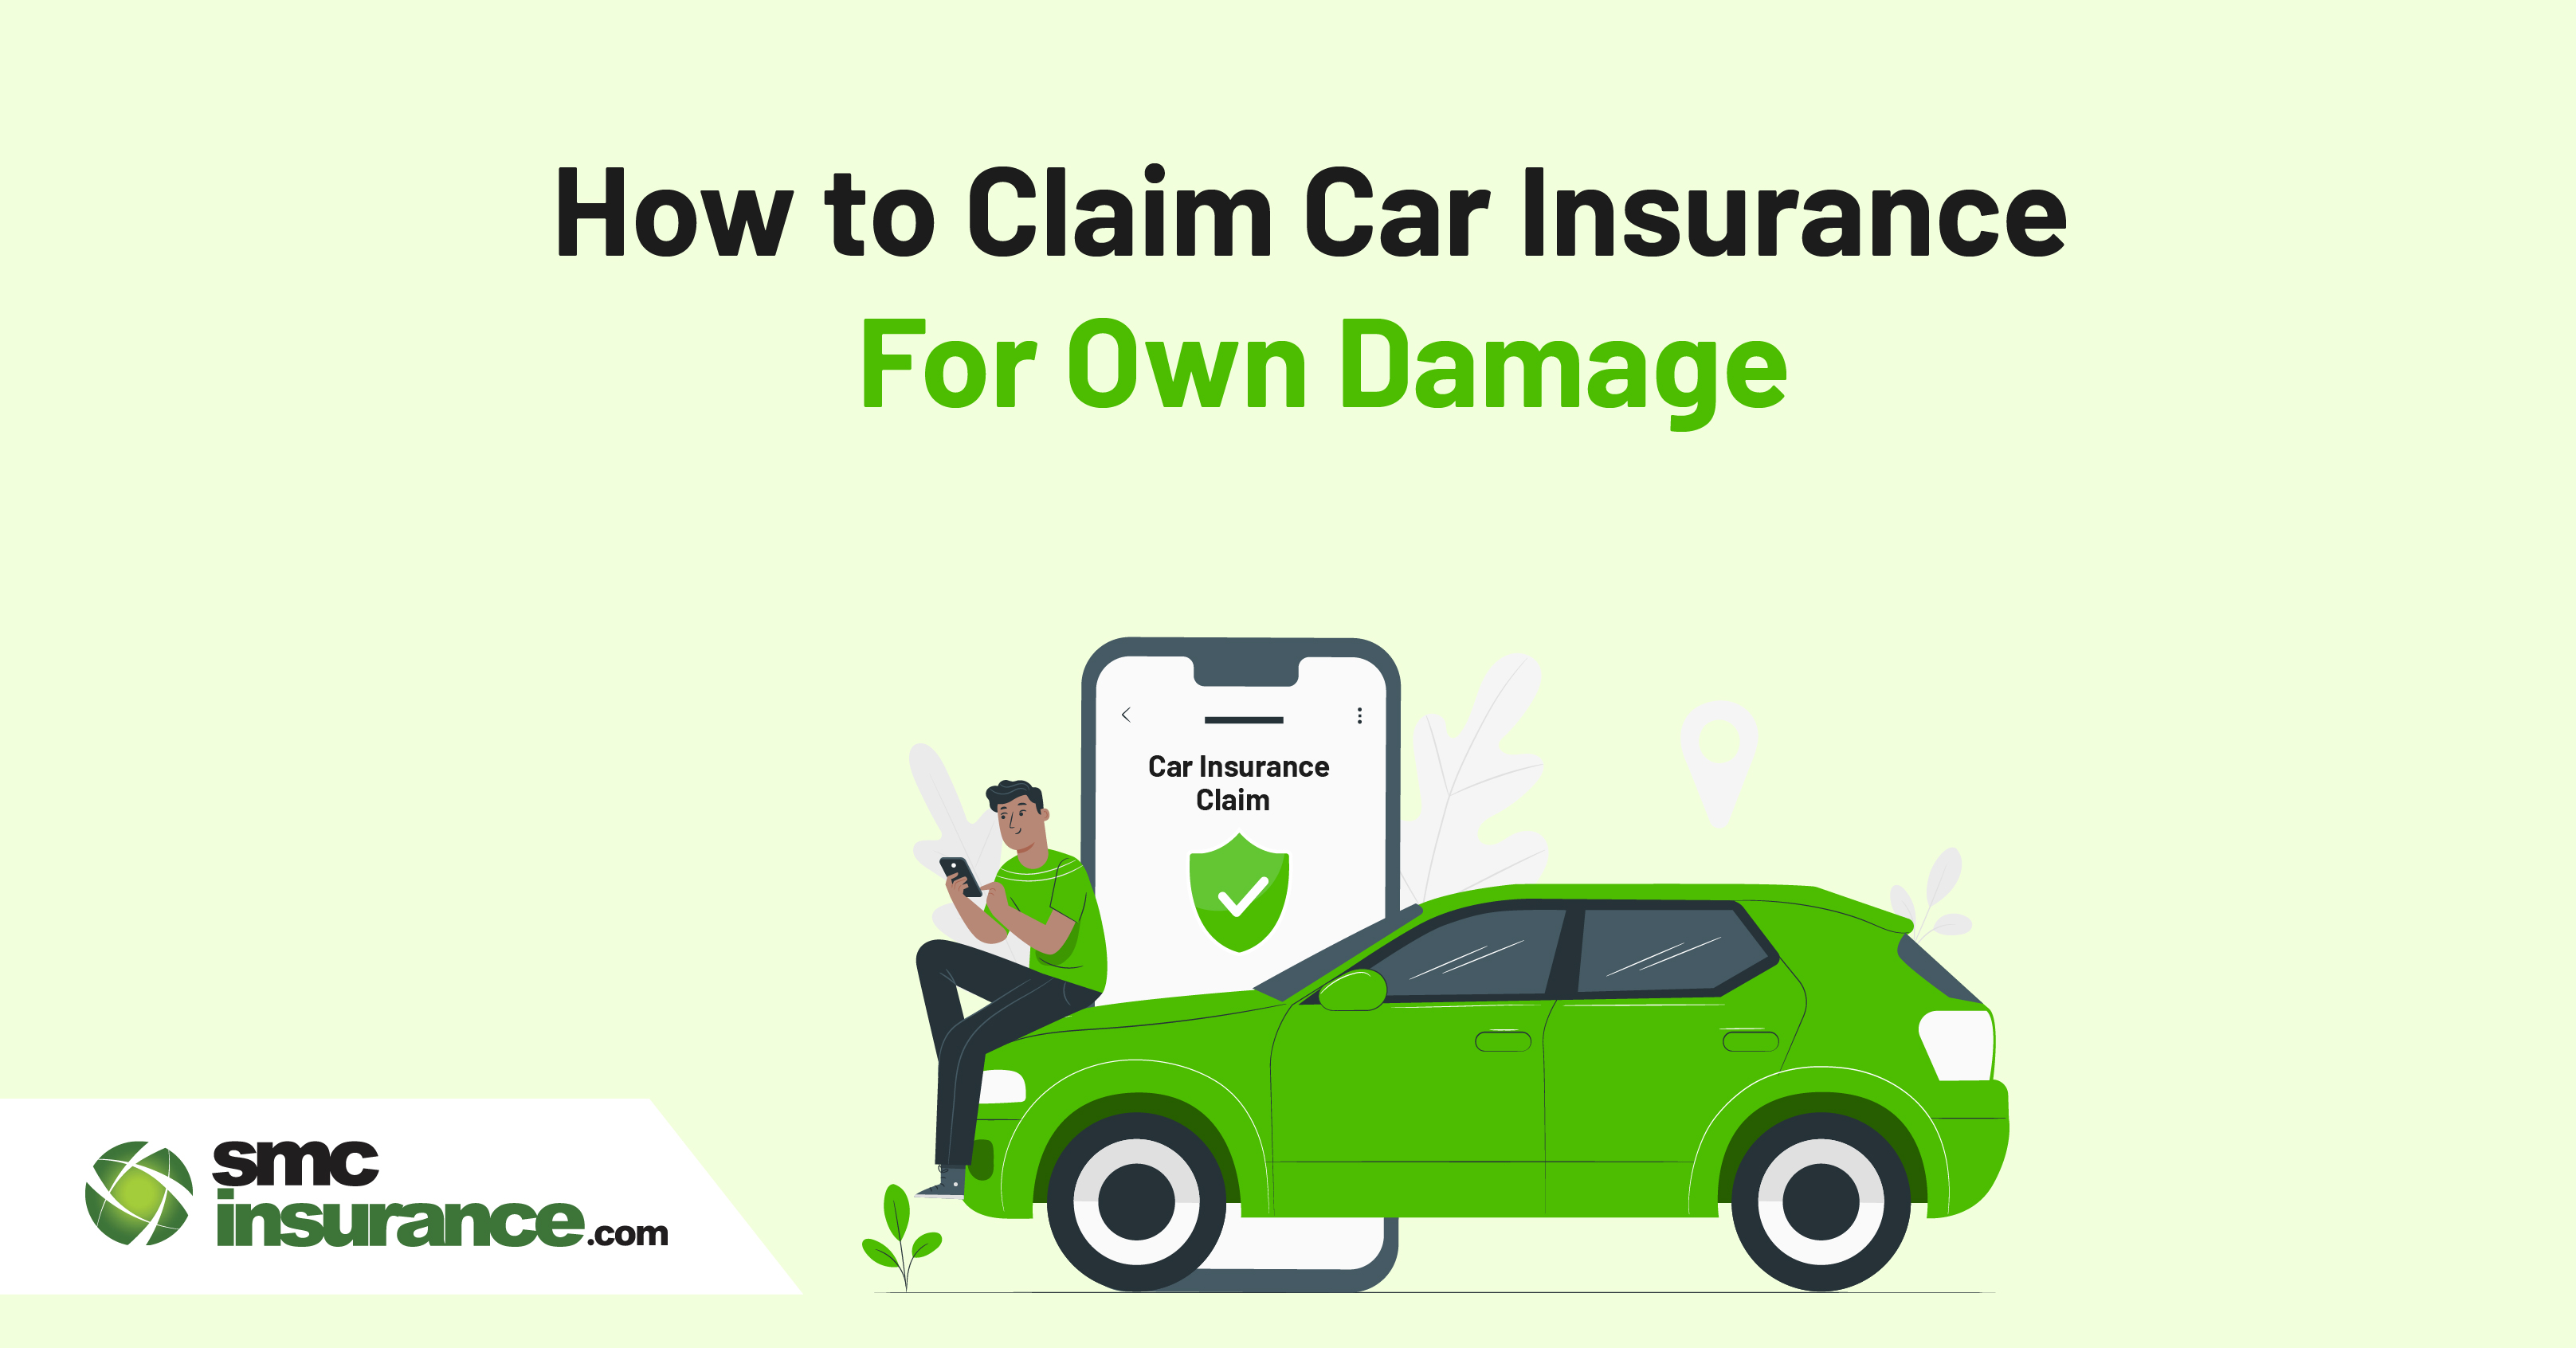 How To Claim Car Insurance For Own Damage?